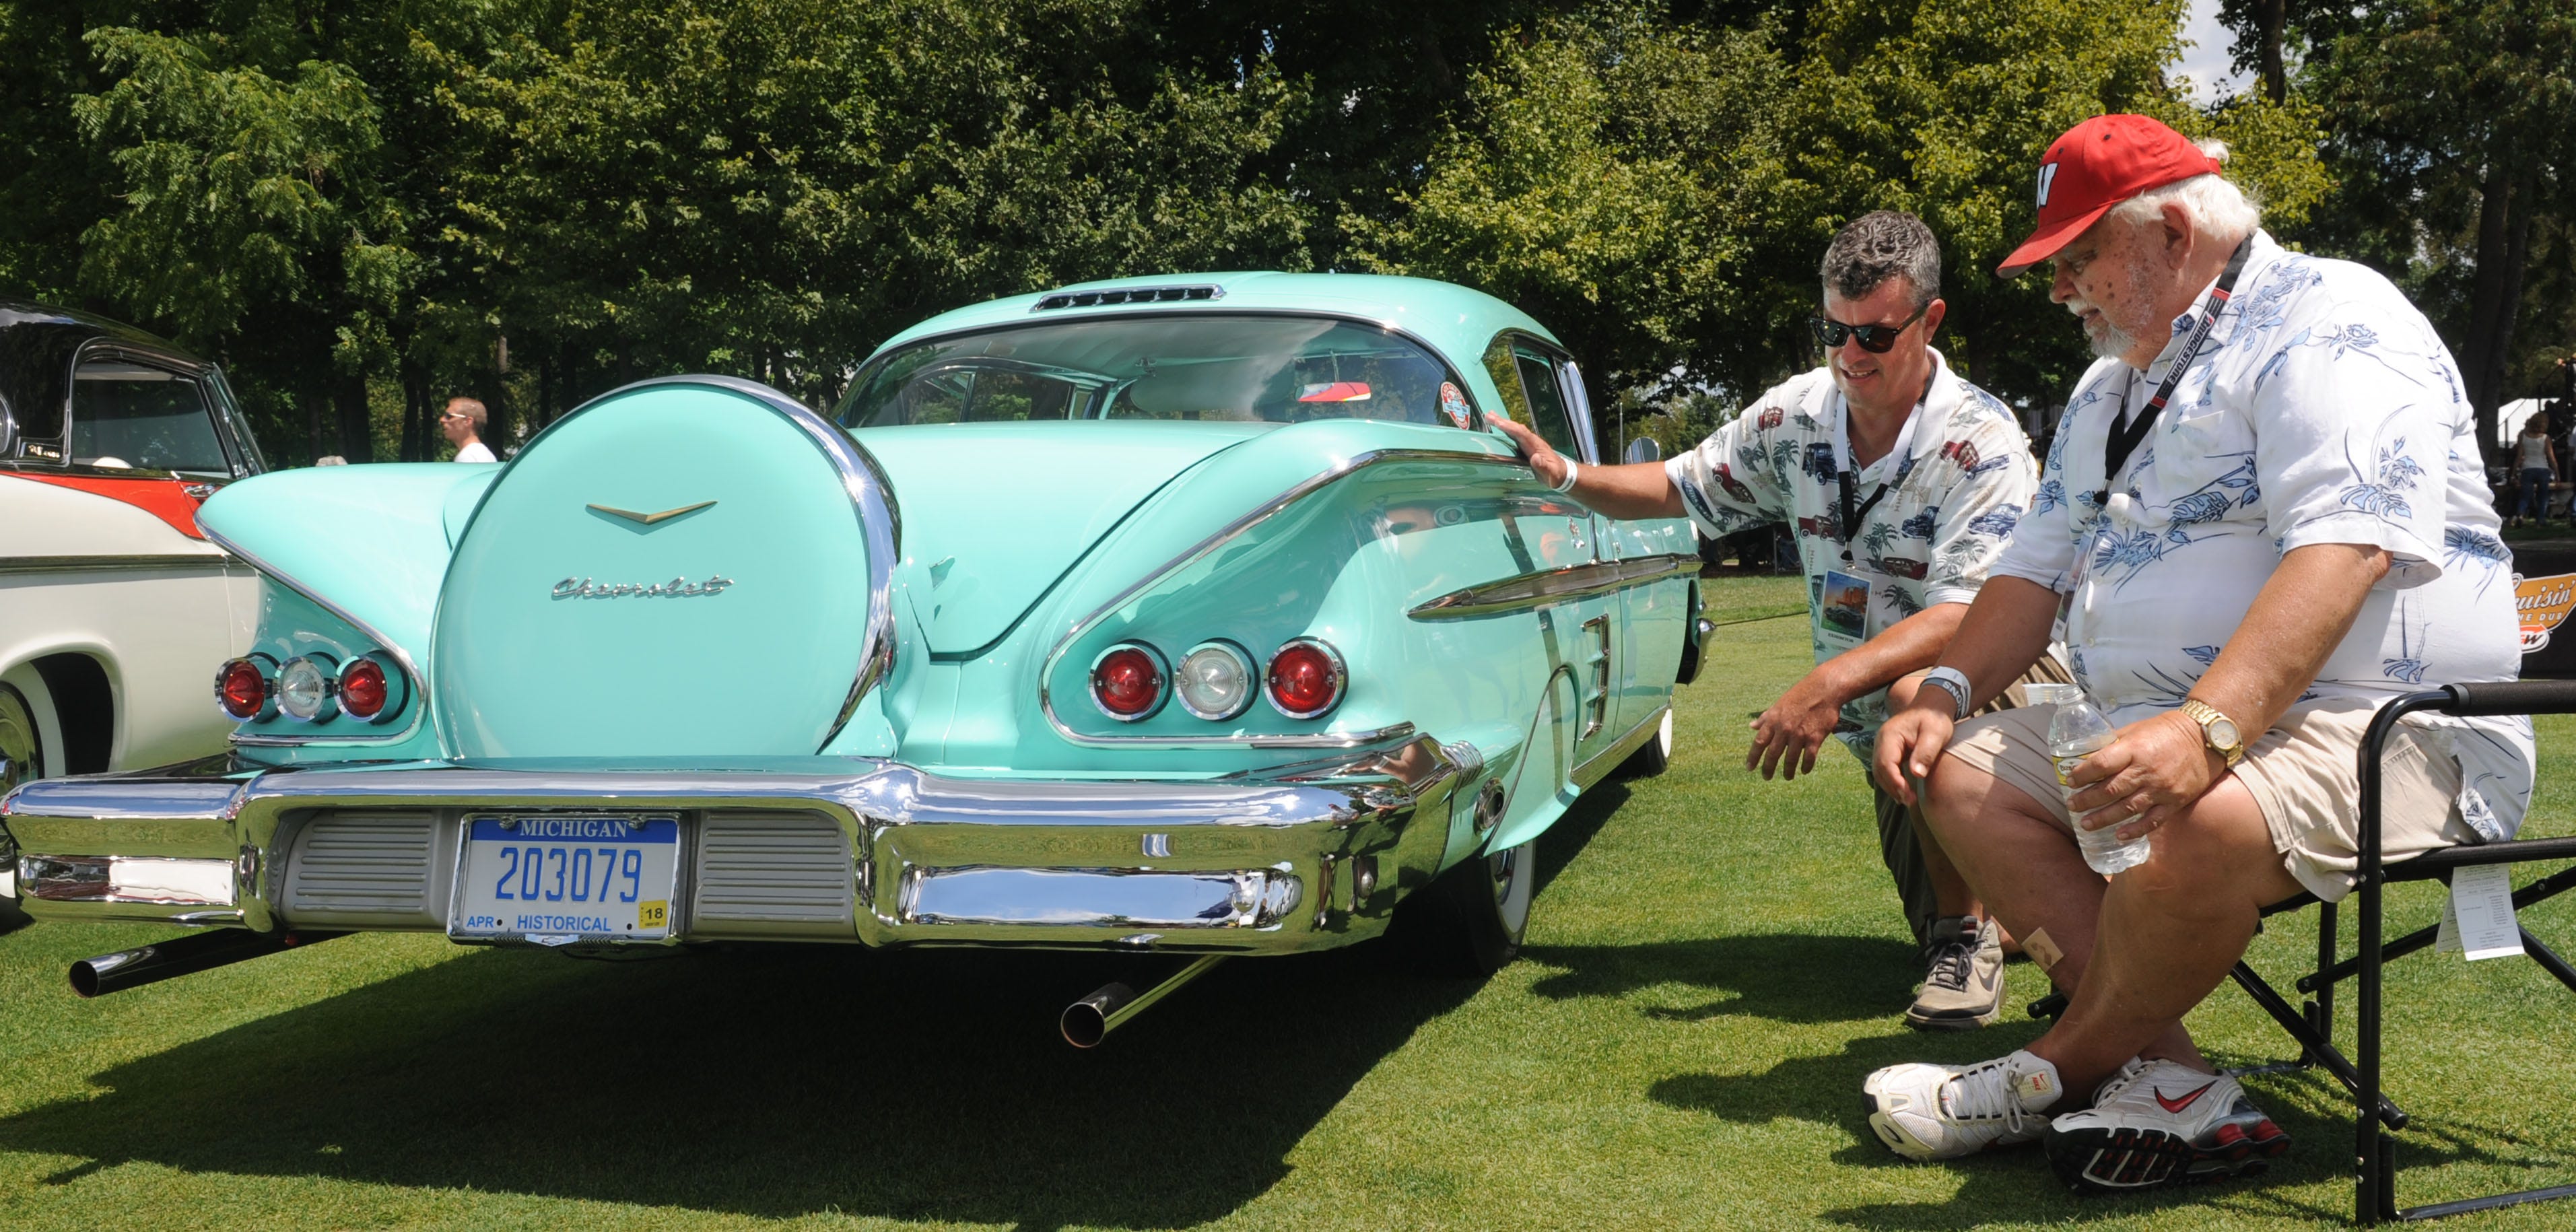 Kurt Machacek and his father Bob Machacek, of Farmington Hills, with their 1958 Chevrolet Impala during the Concours d'Elegance at St. John's in Plymouth.